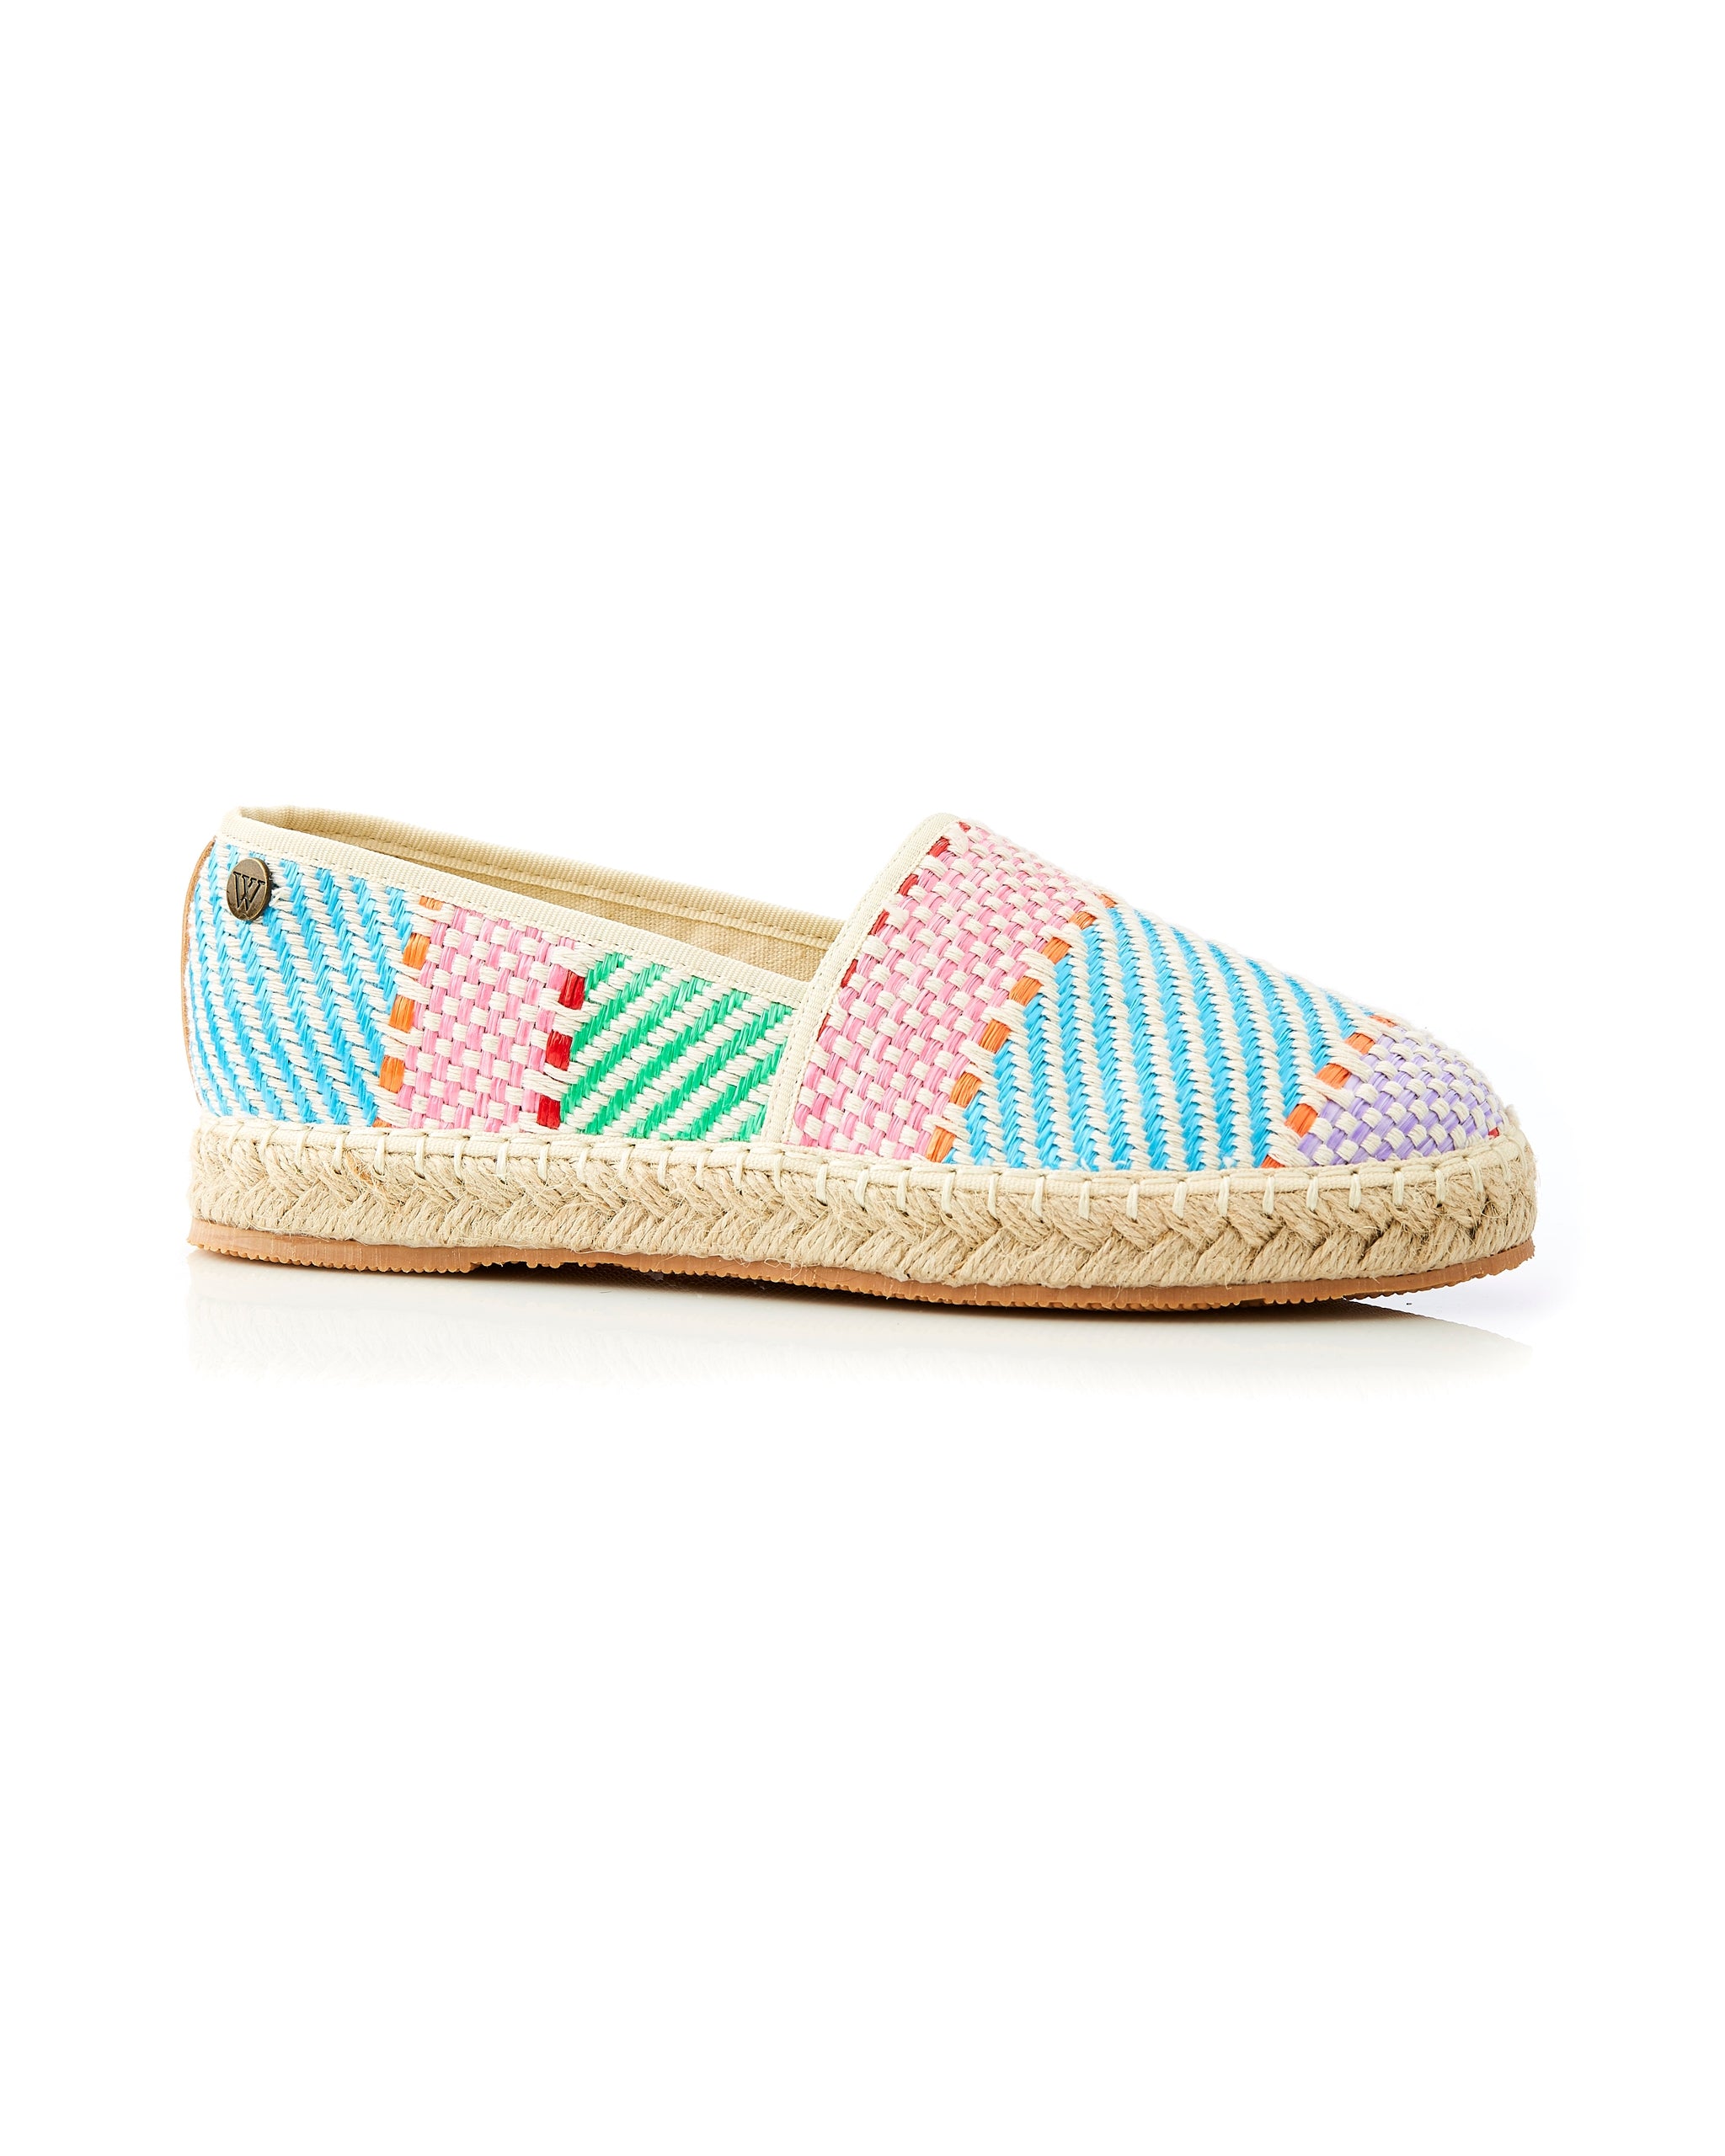 Georgie Weave Espadrille Bright Combo side view